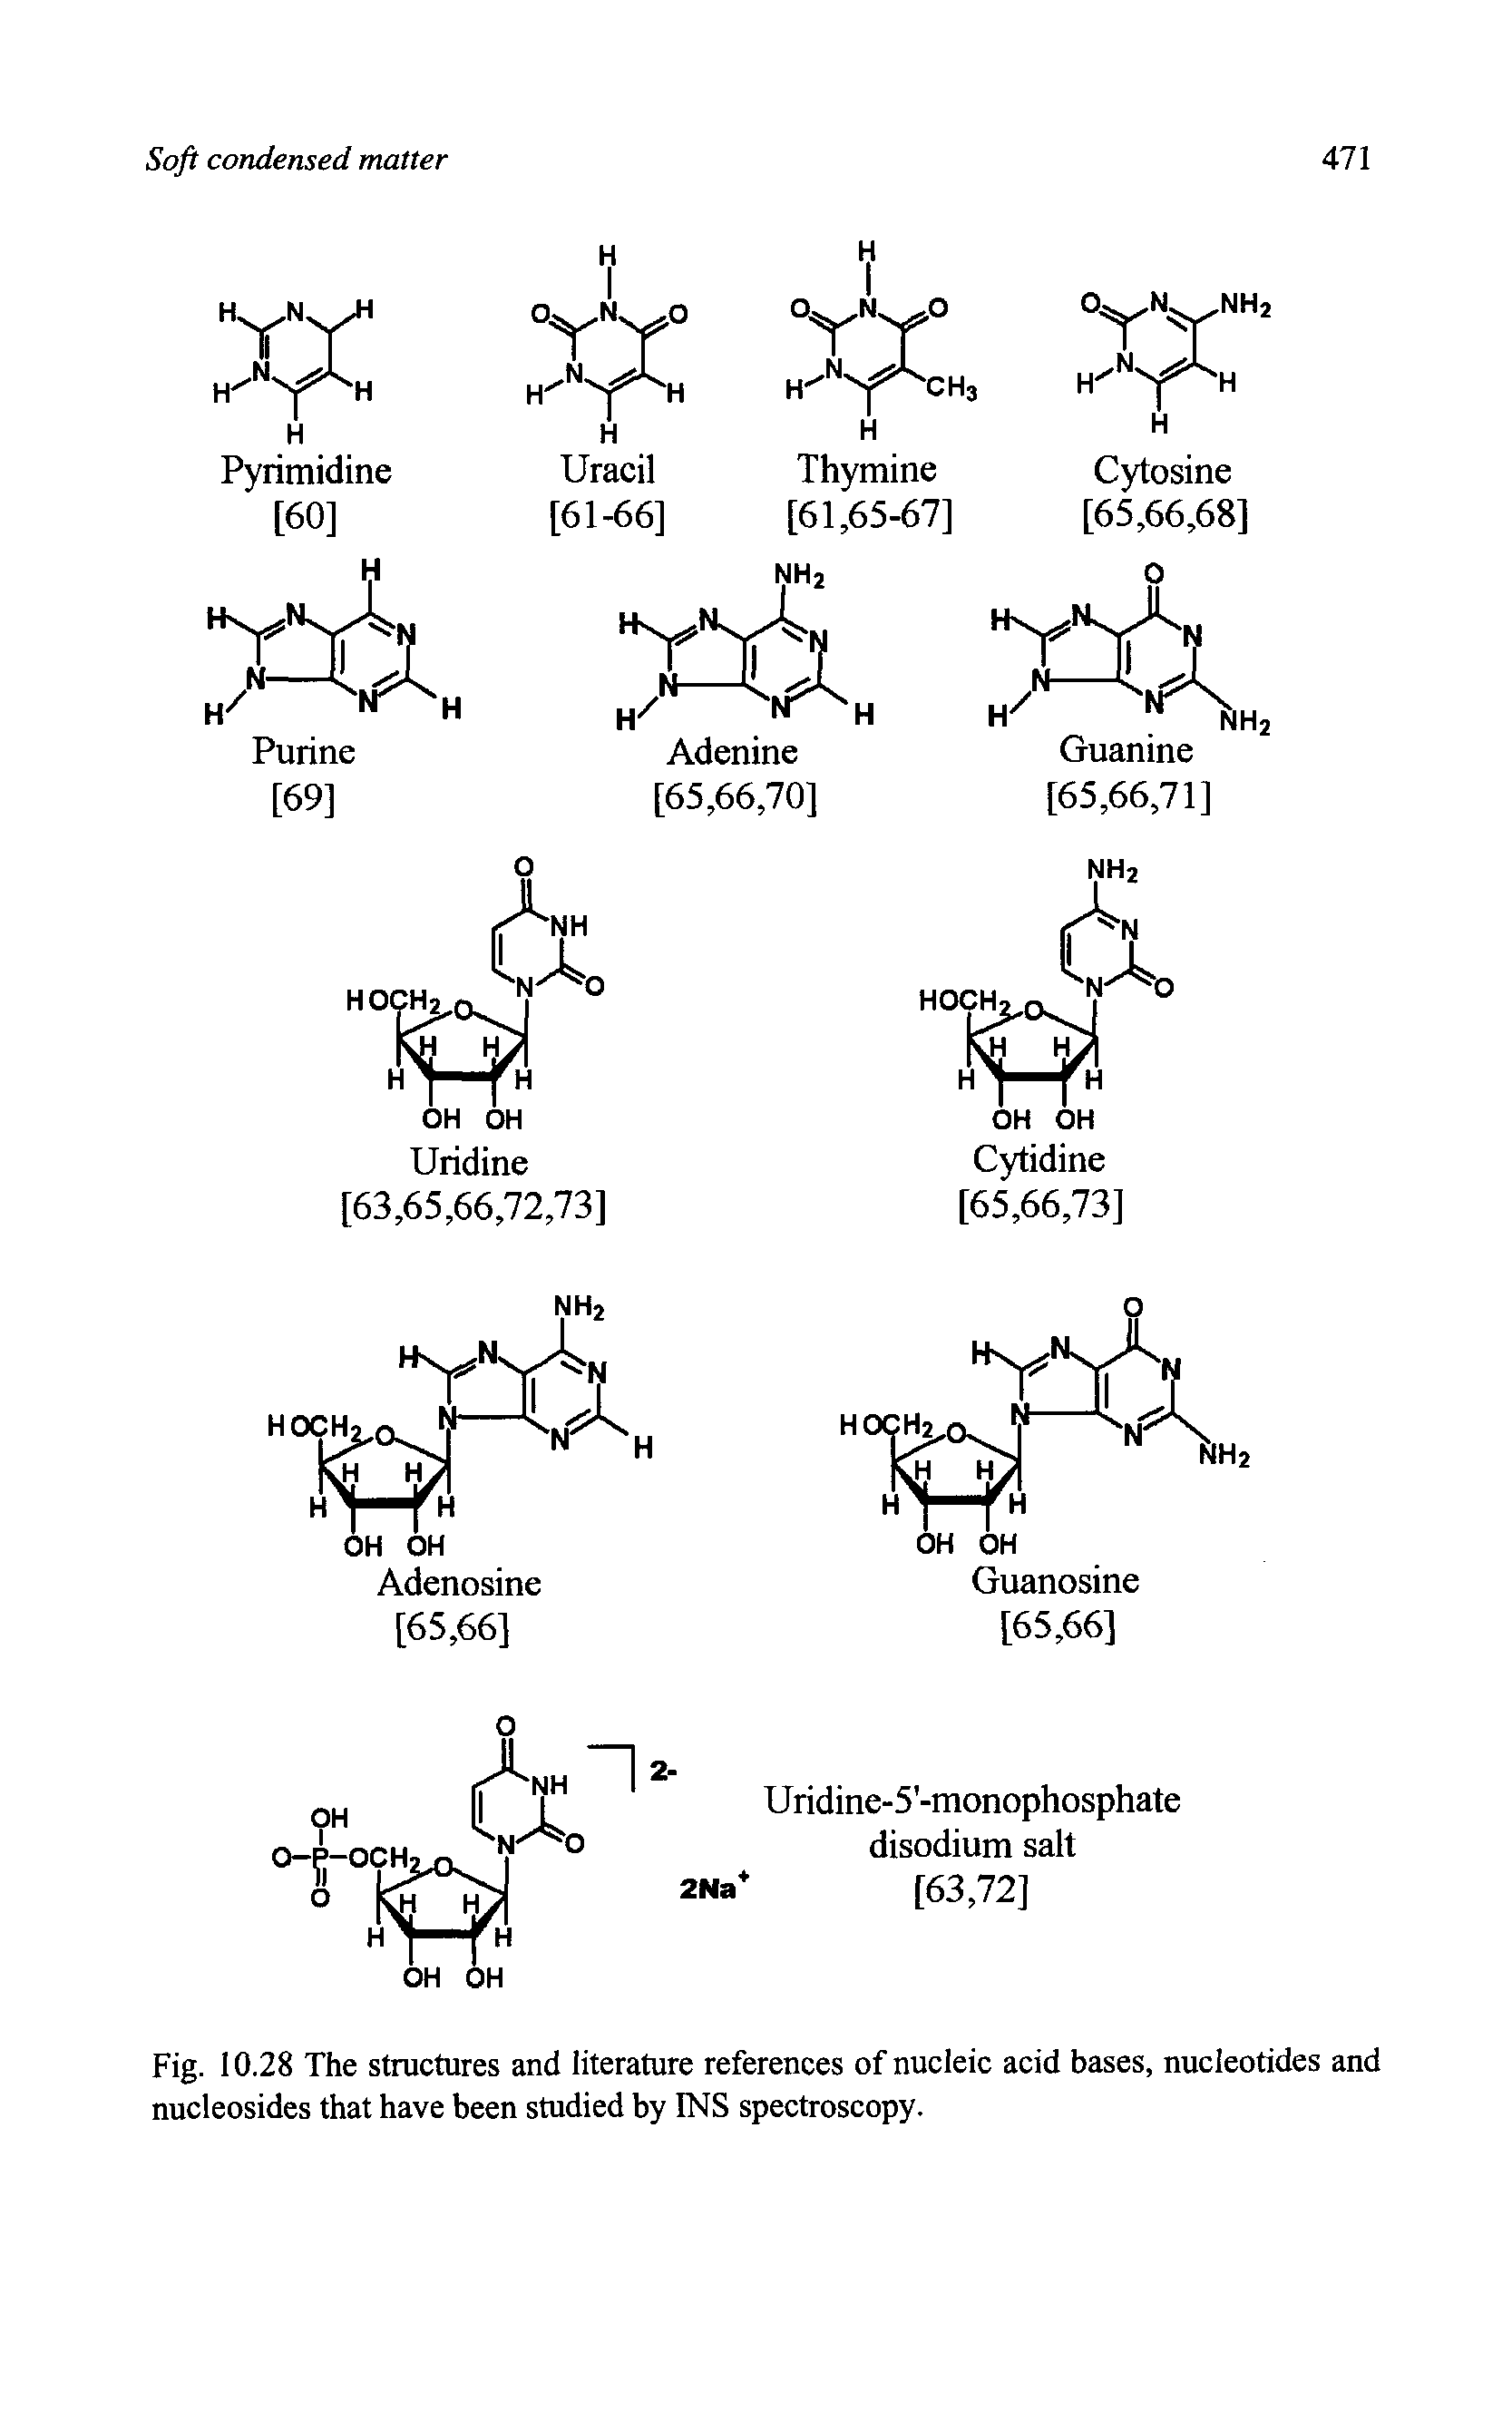 Fig. 10.28 The structures and literature references of nucleic acid bases, nucleotides and nucleosides that have been studied by INS spectroscopy.